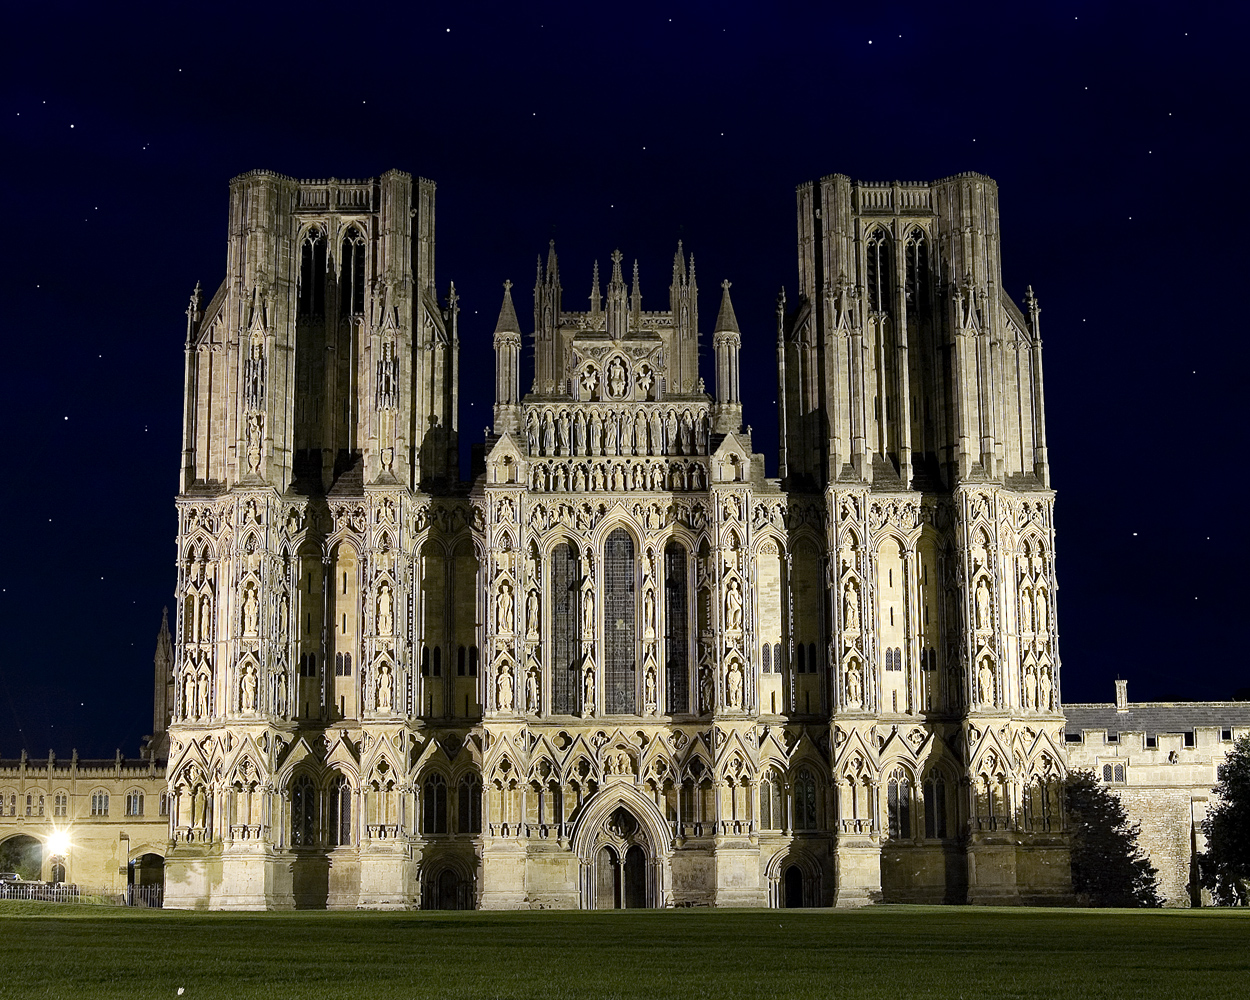 Wells Cathedral, England, 1175 AD